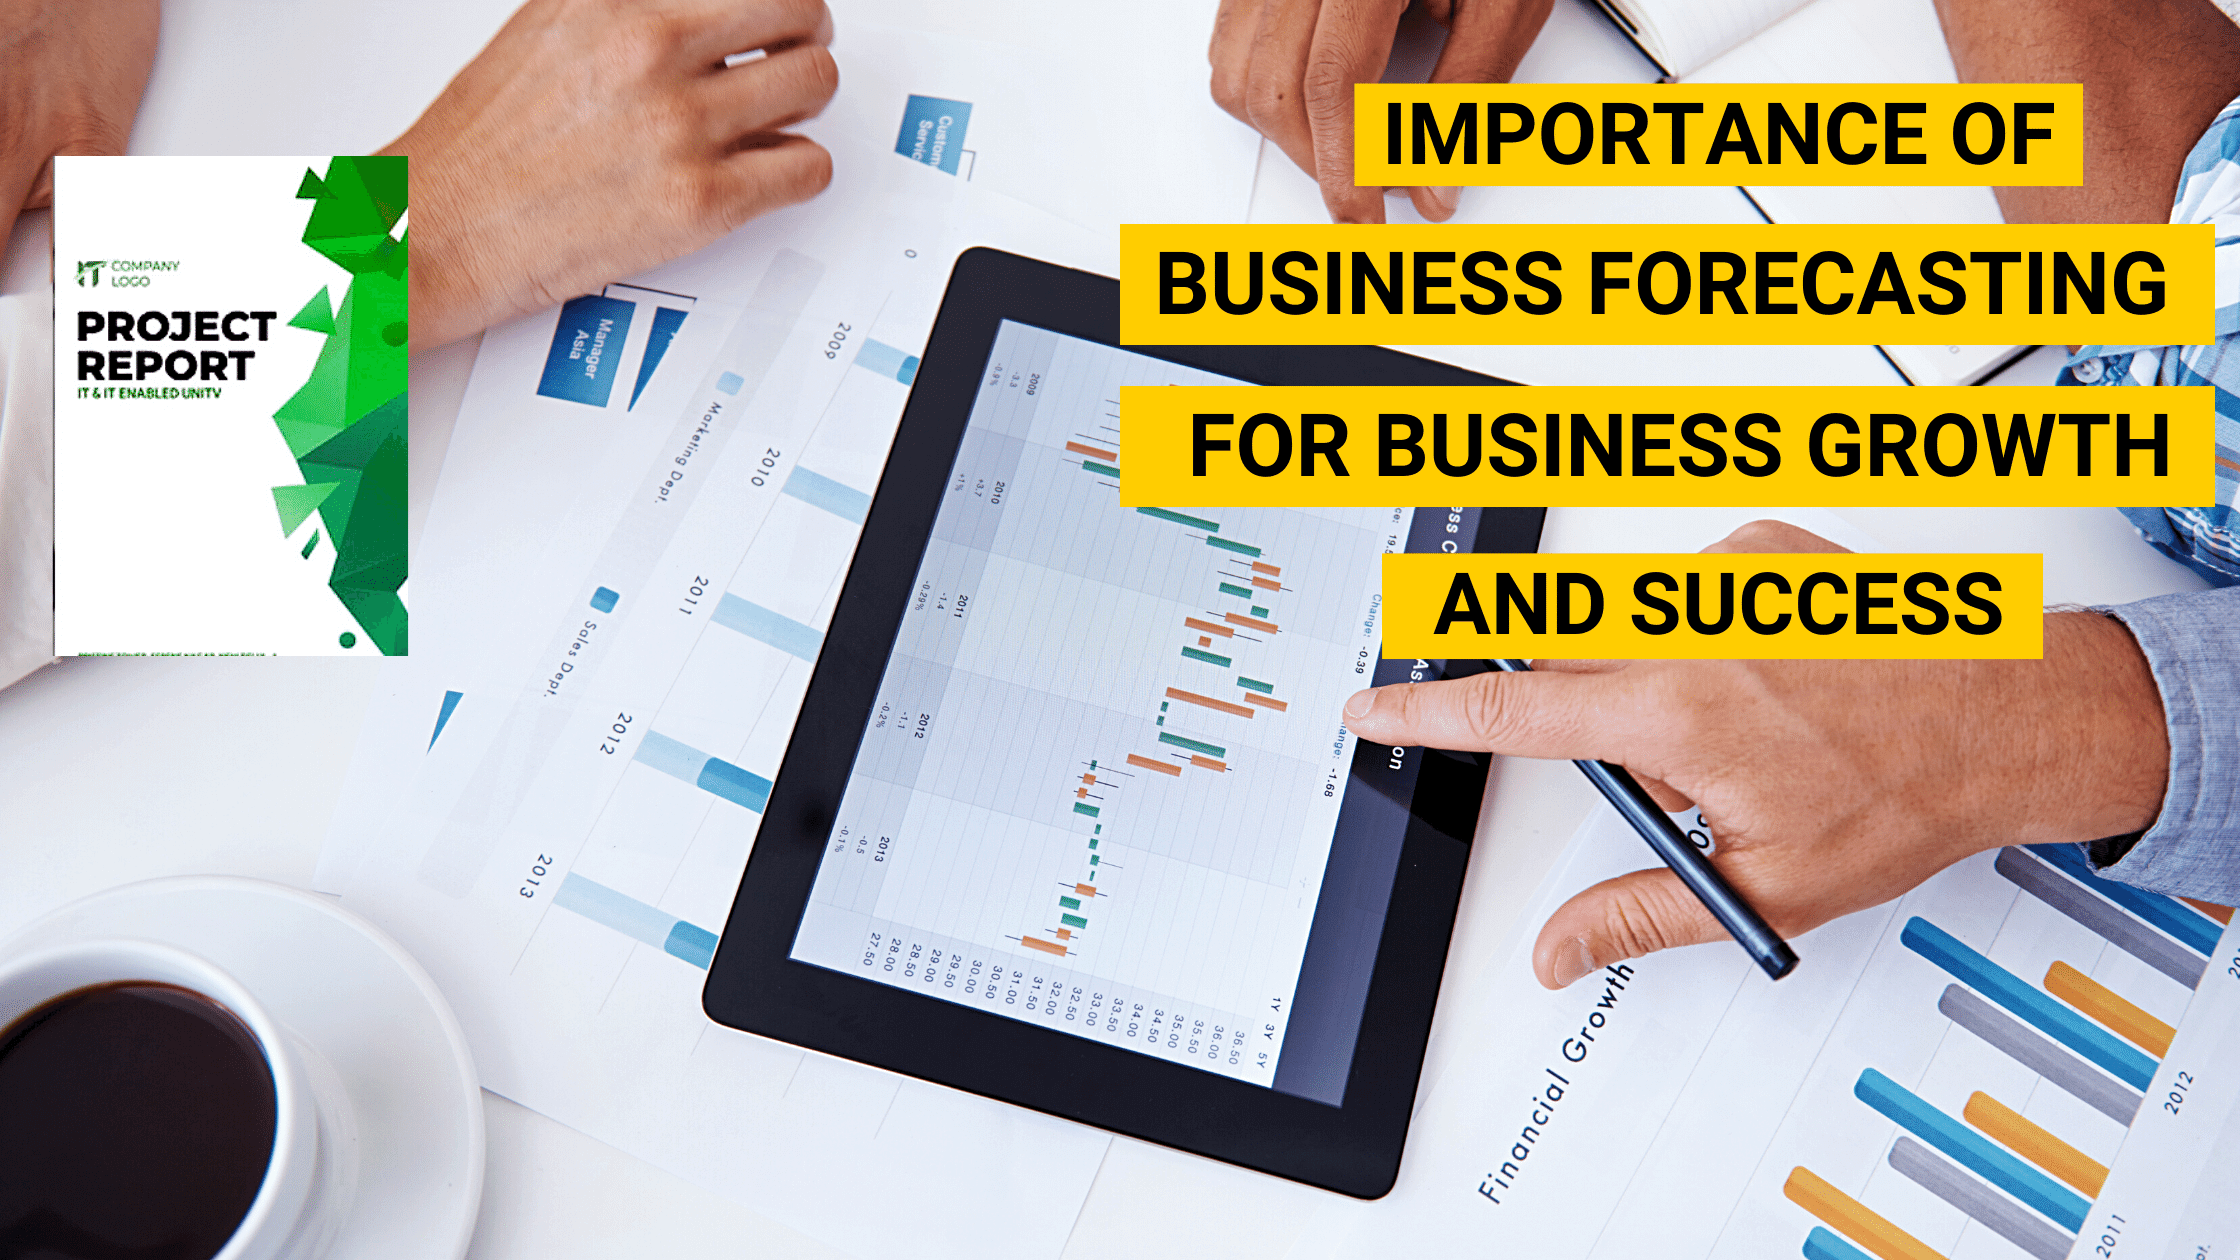 Importance of business forecasting for business growth and success